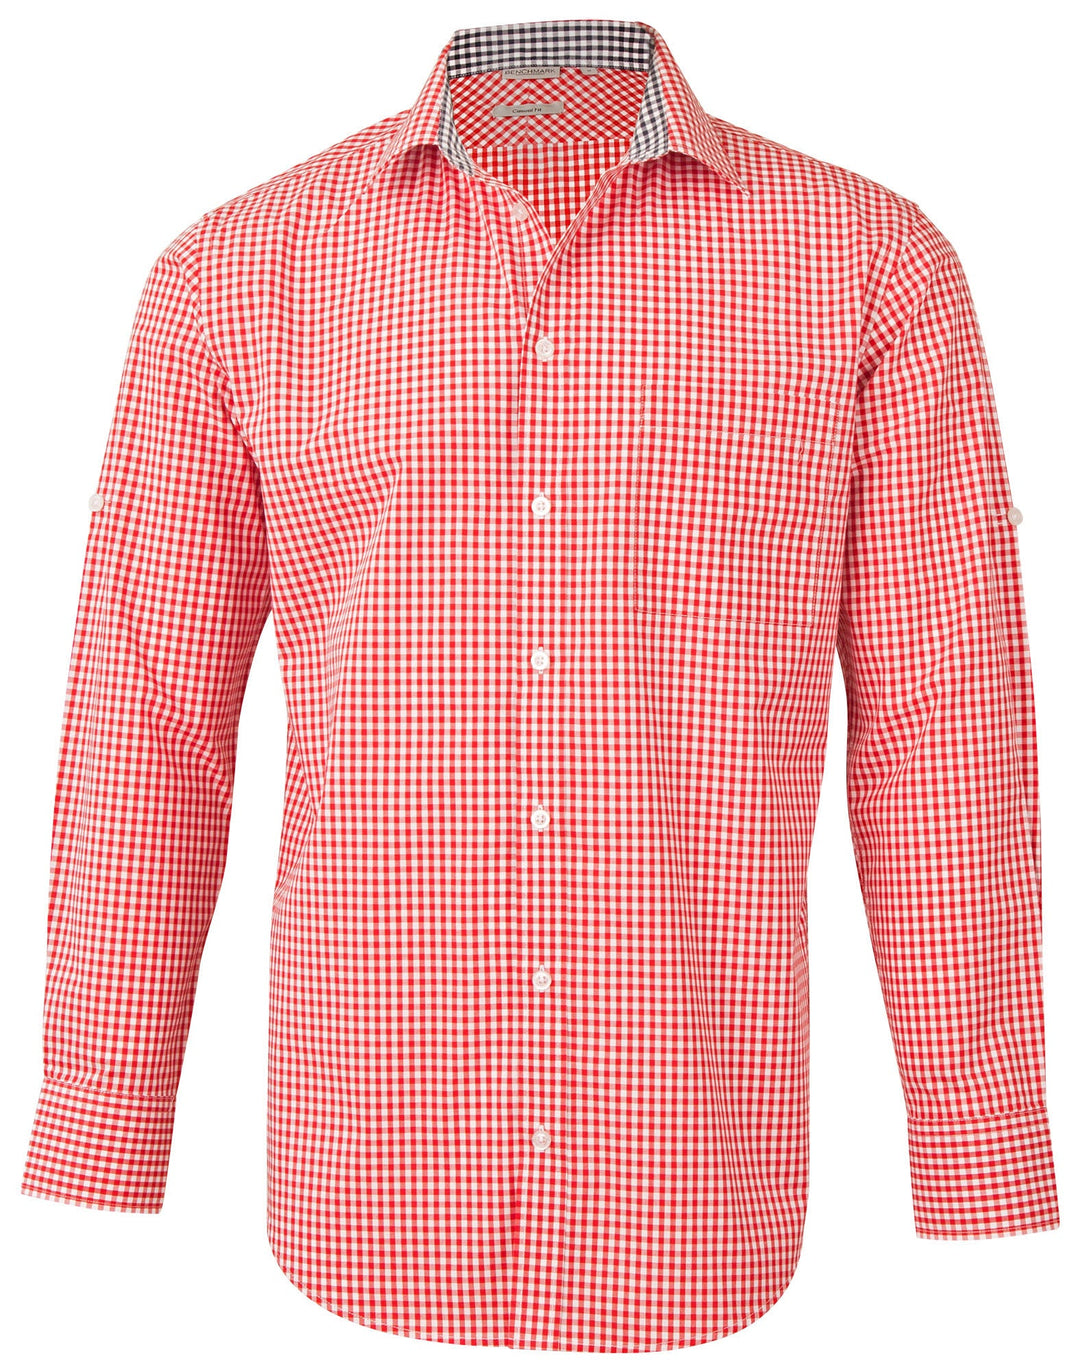 Benchmark M7330L Mens Gingham Check Long Sleeve Shirt With Roll-Up Tab Sleeve